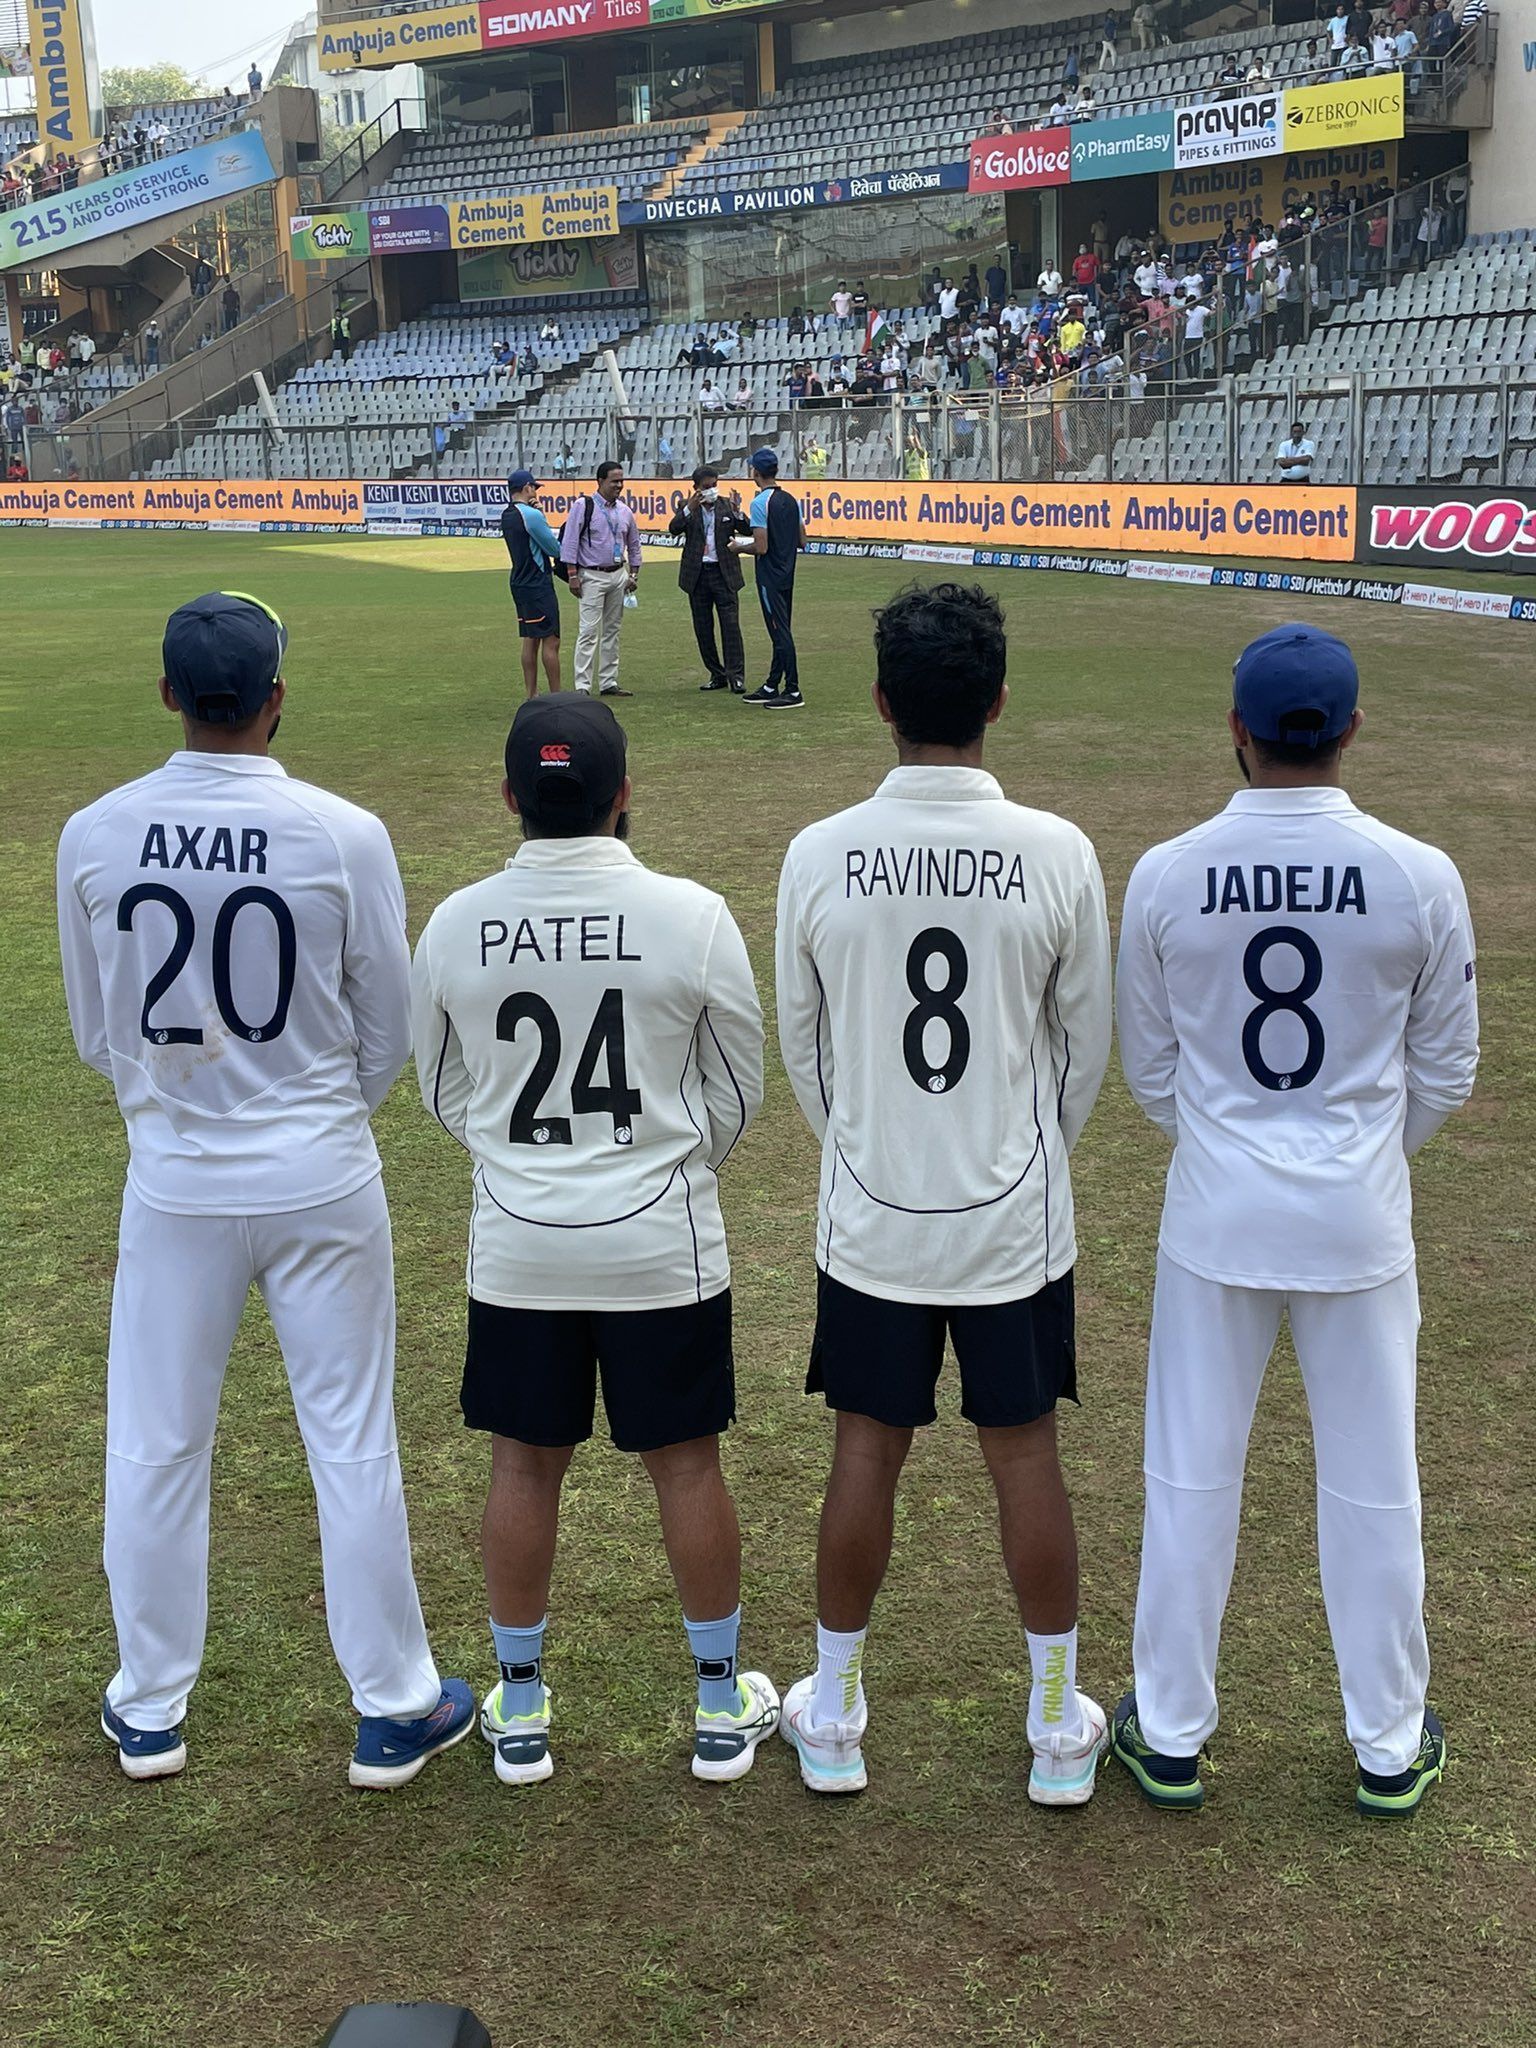 Picture shared by Ravichandran Ashwin after India secure Test series win versus New Zealand